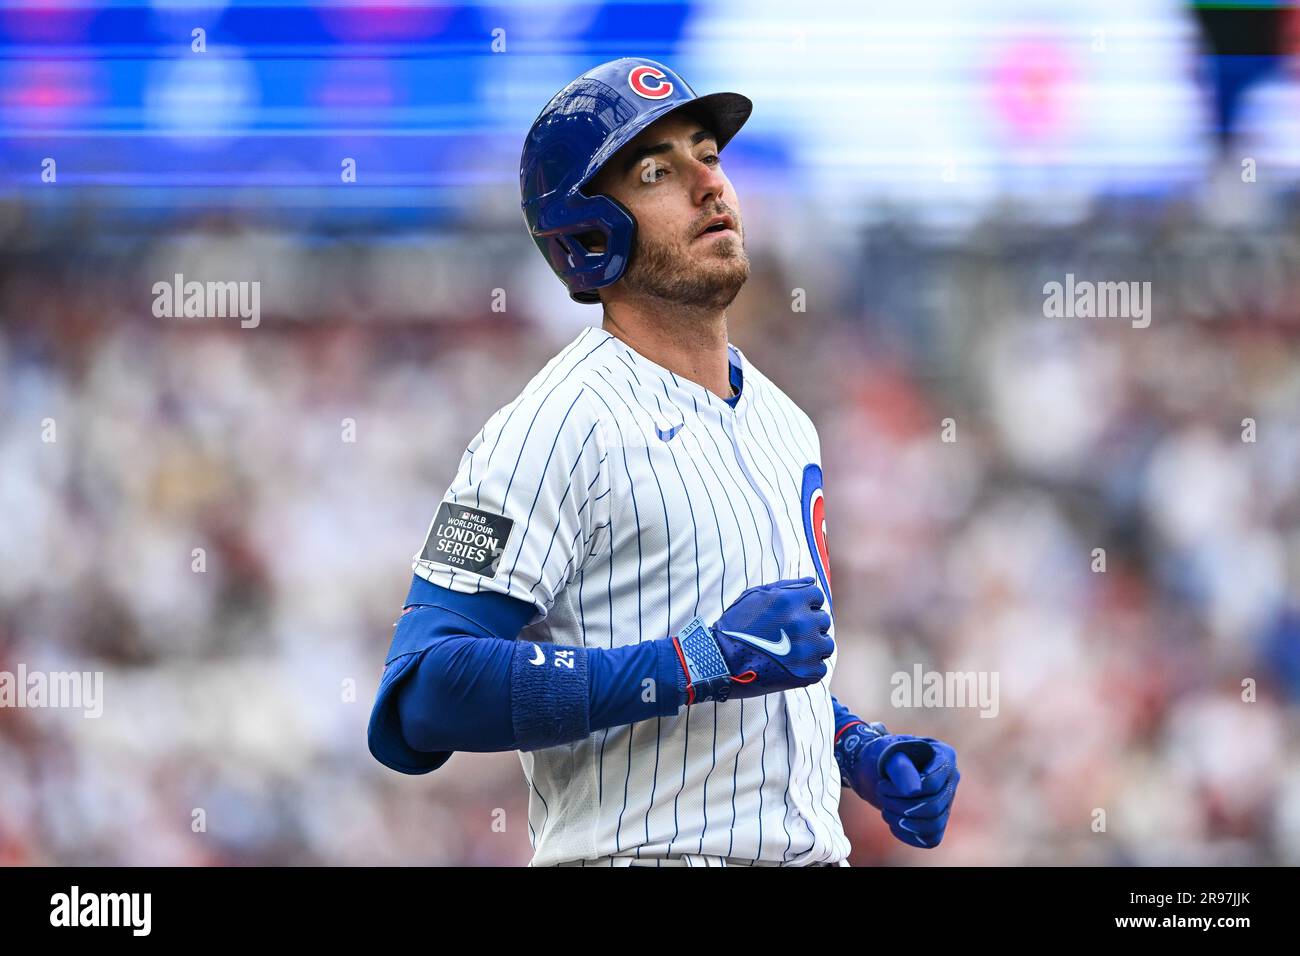 Cody Bellinger #24 of the Chicago Cubs during the 2023 MLB London Series match St